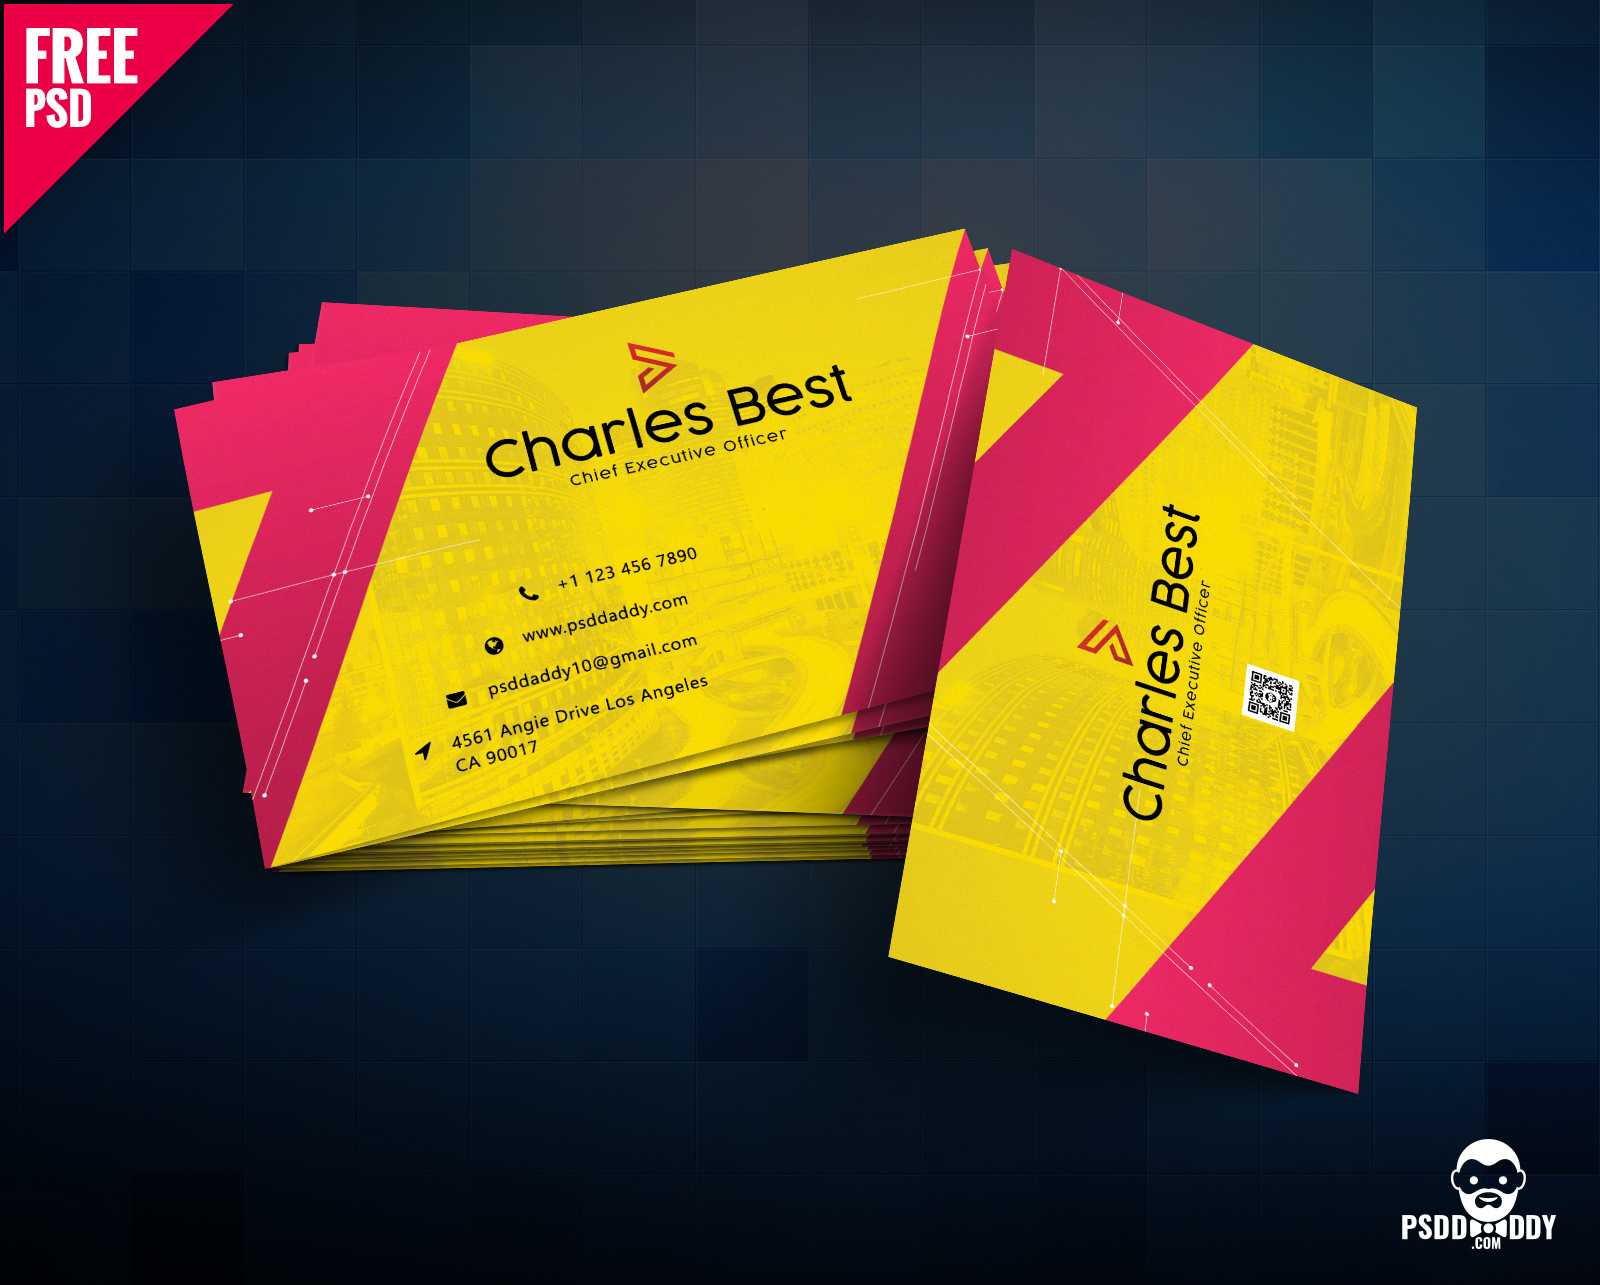 Download] Creative Business Card Free Psd | Psddaddy For Calling Card Psd Template